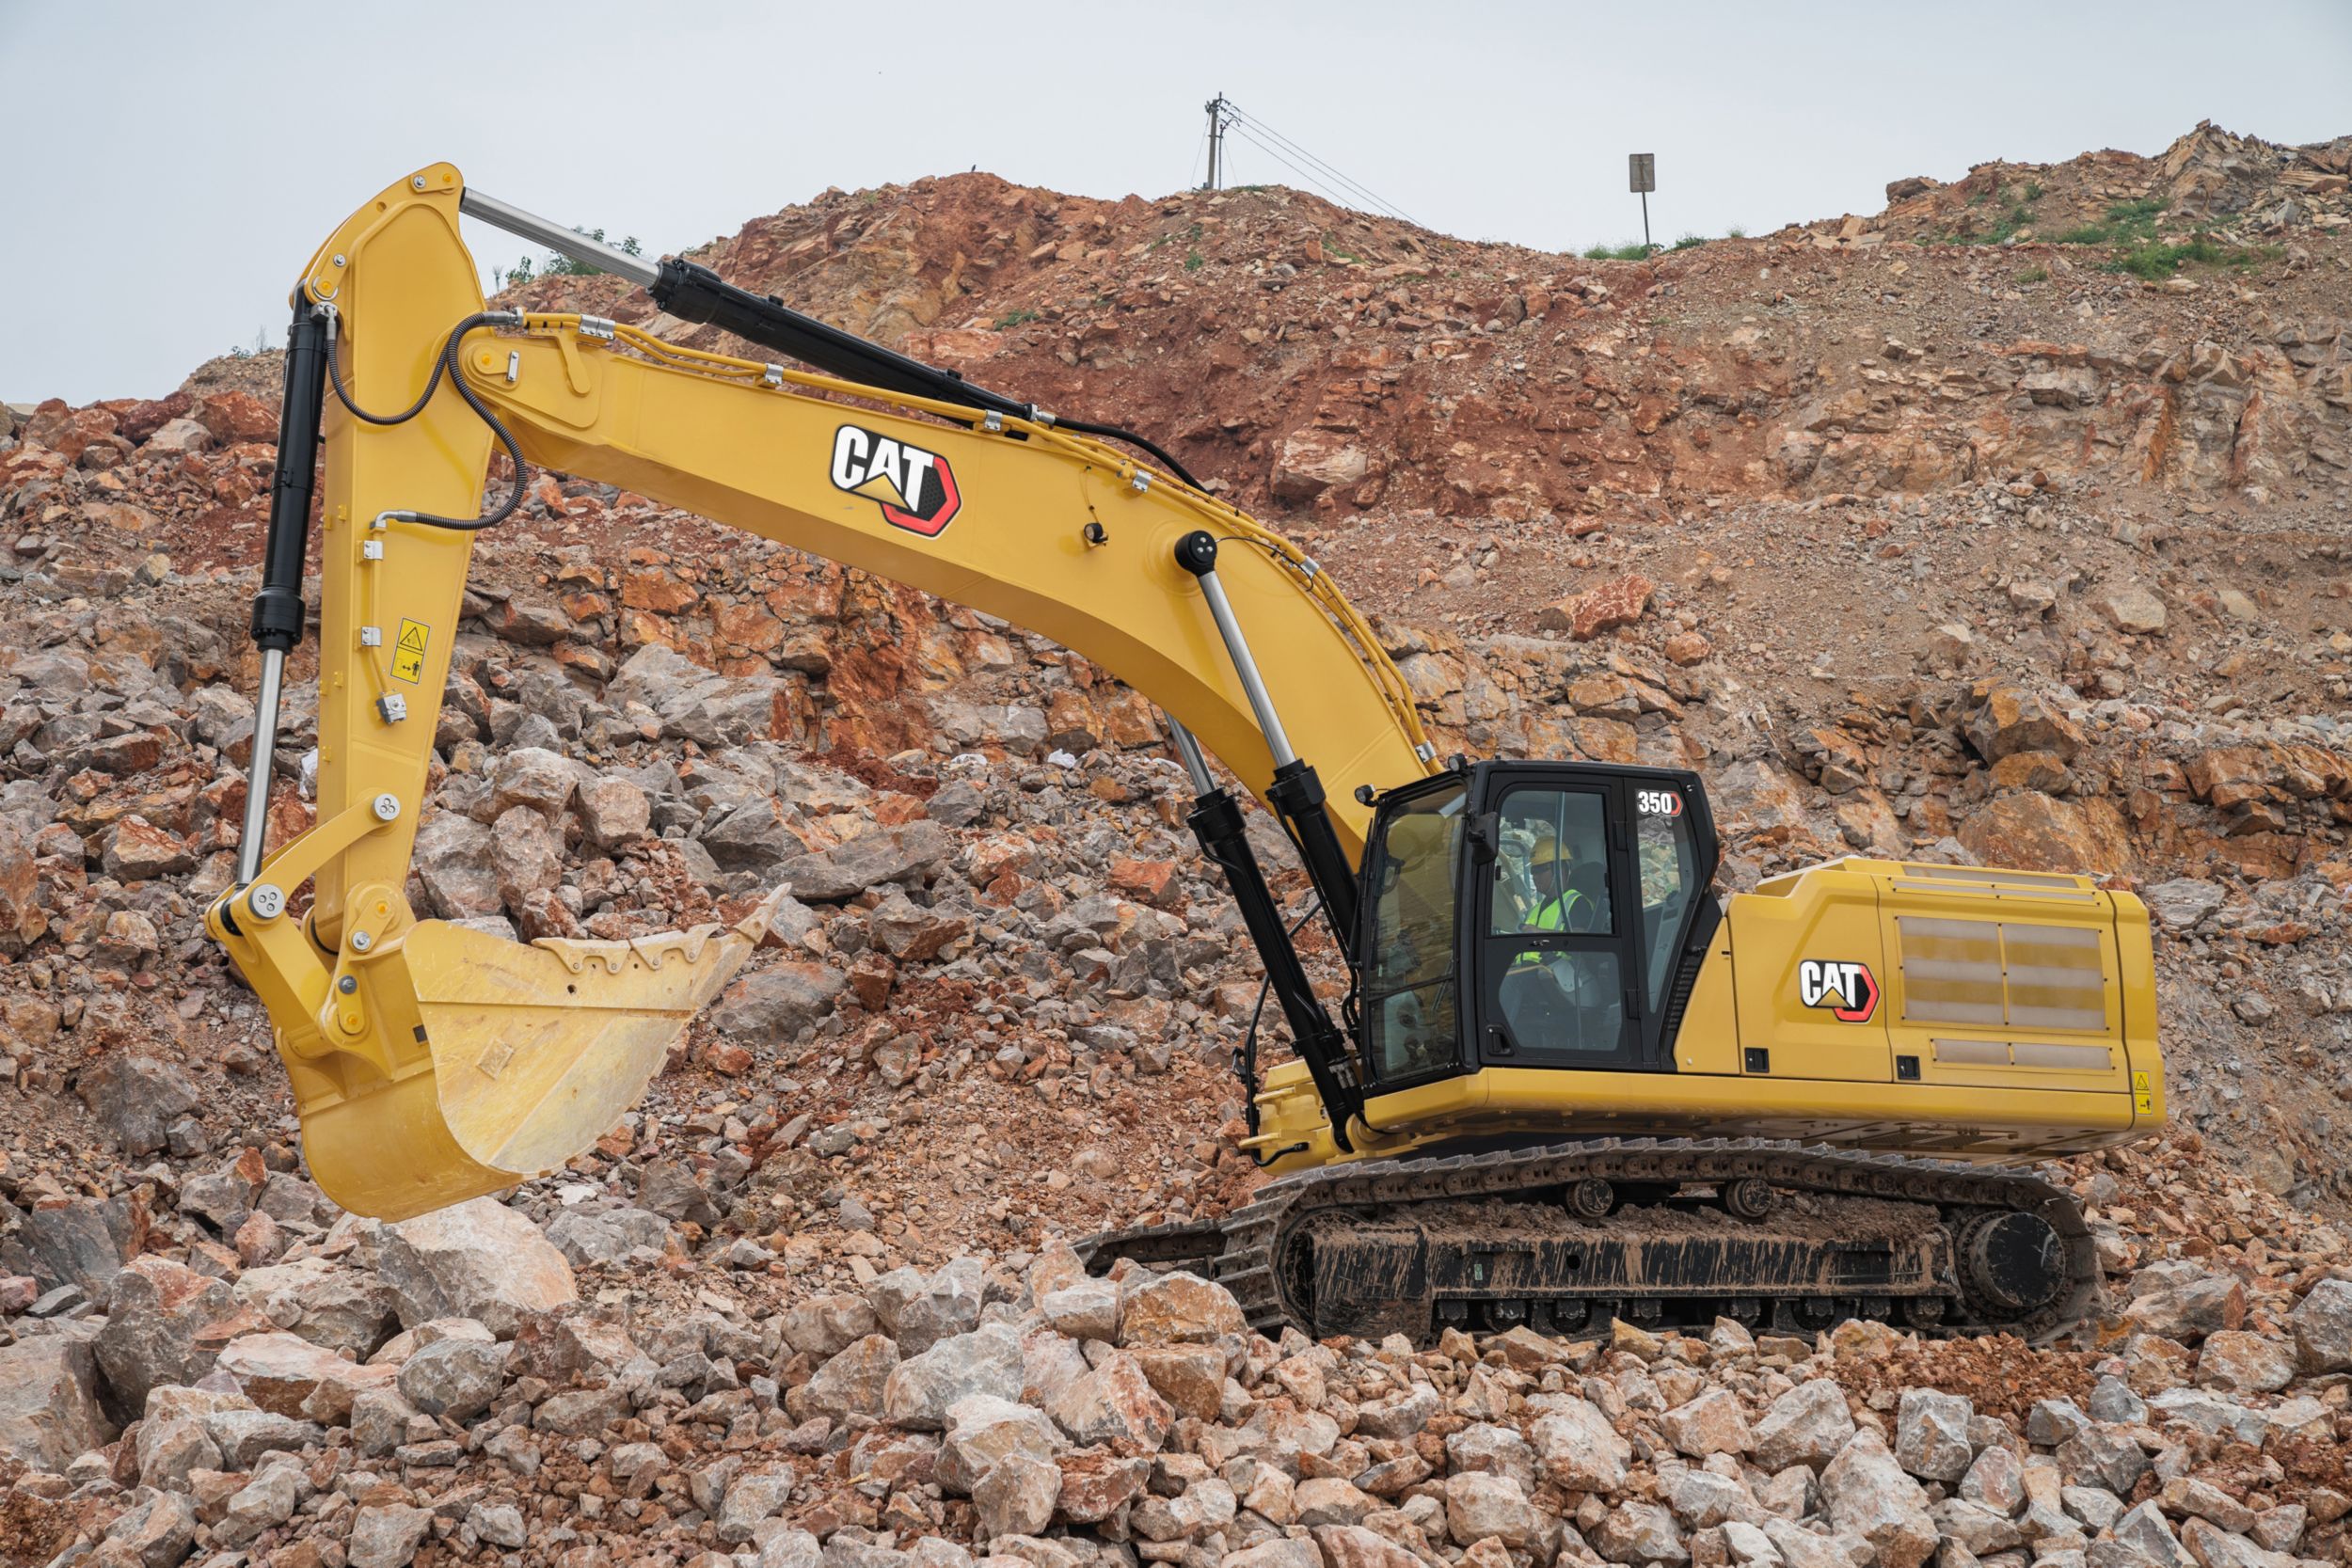 The 350 offers Power and Smart modes to help operators efficiently move material.